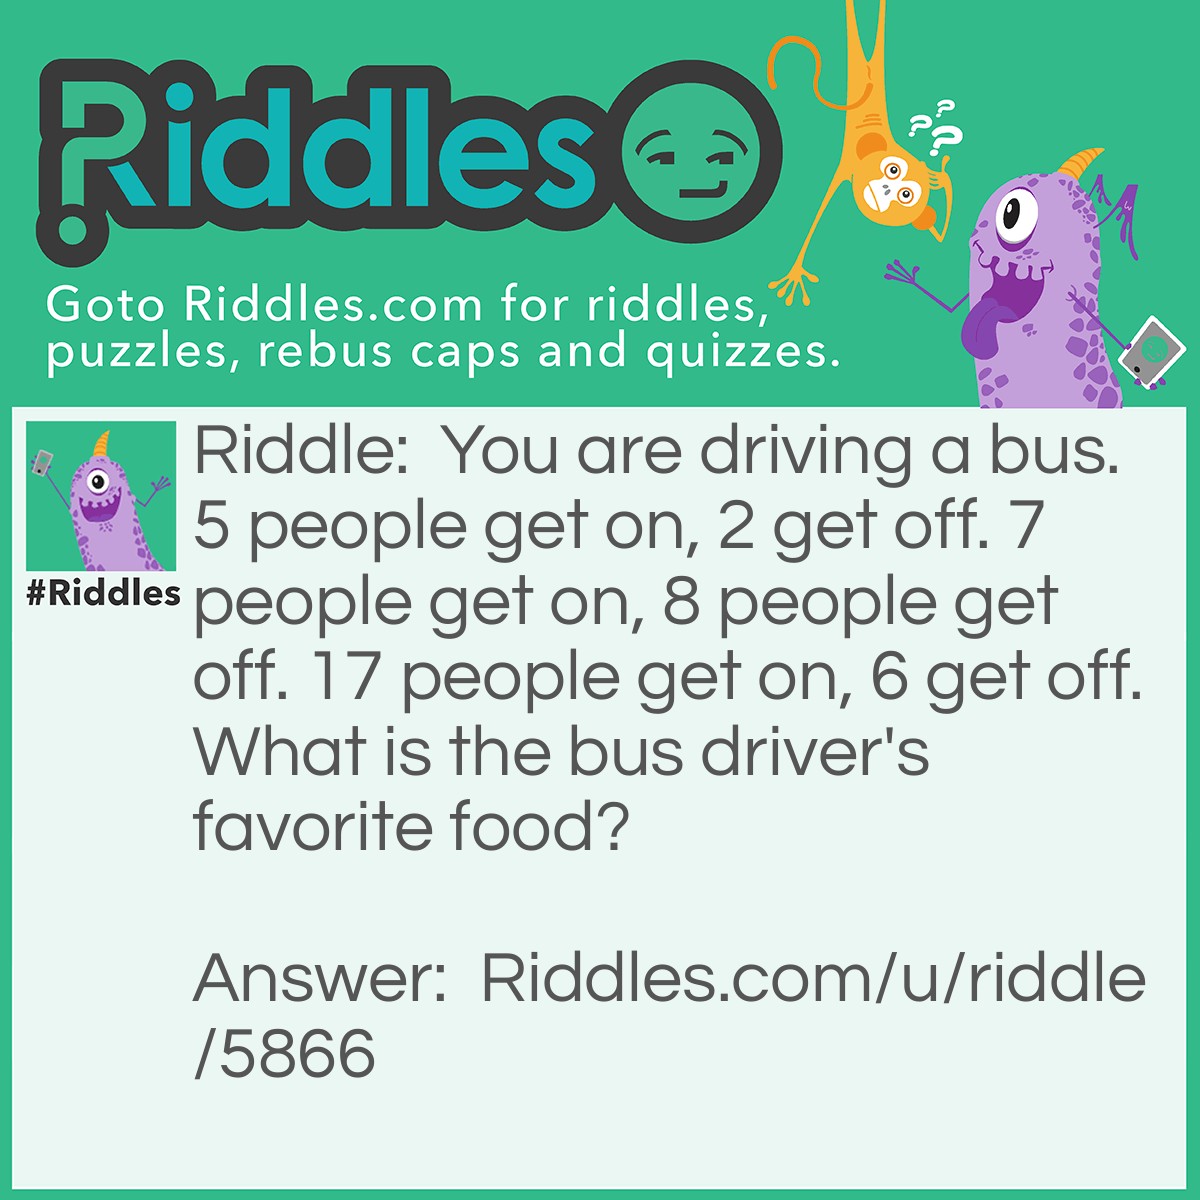 Riddle: You are driving a bus. 5 people get on, 2 get off. 7 people get on, 8 people get off. 17 people get on, 6 get off. What is the bus driver's favorite food? Answer: YOUR favorite food. Your the one driving the bus!